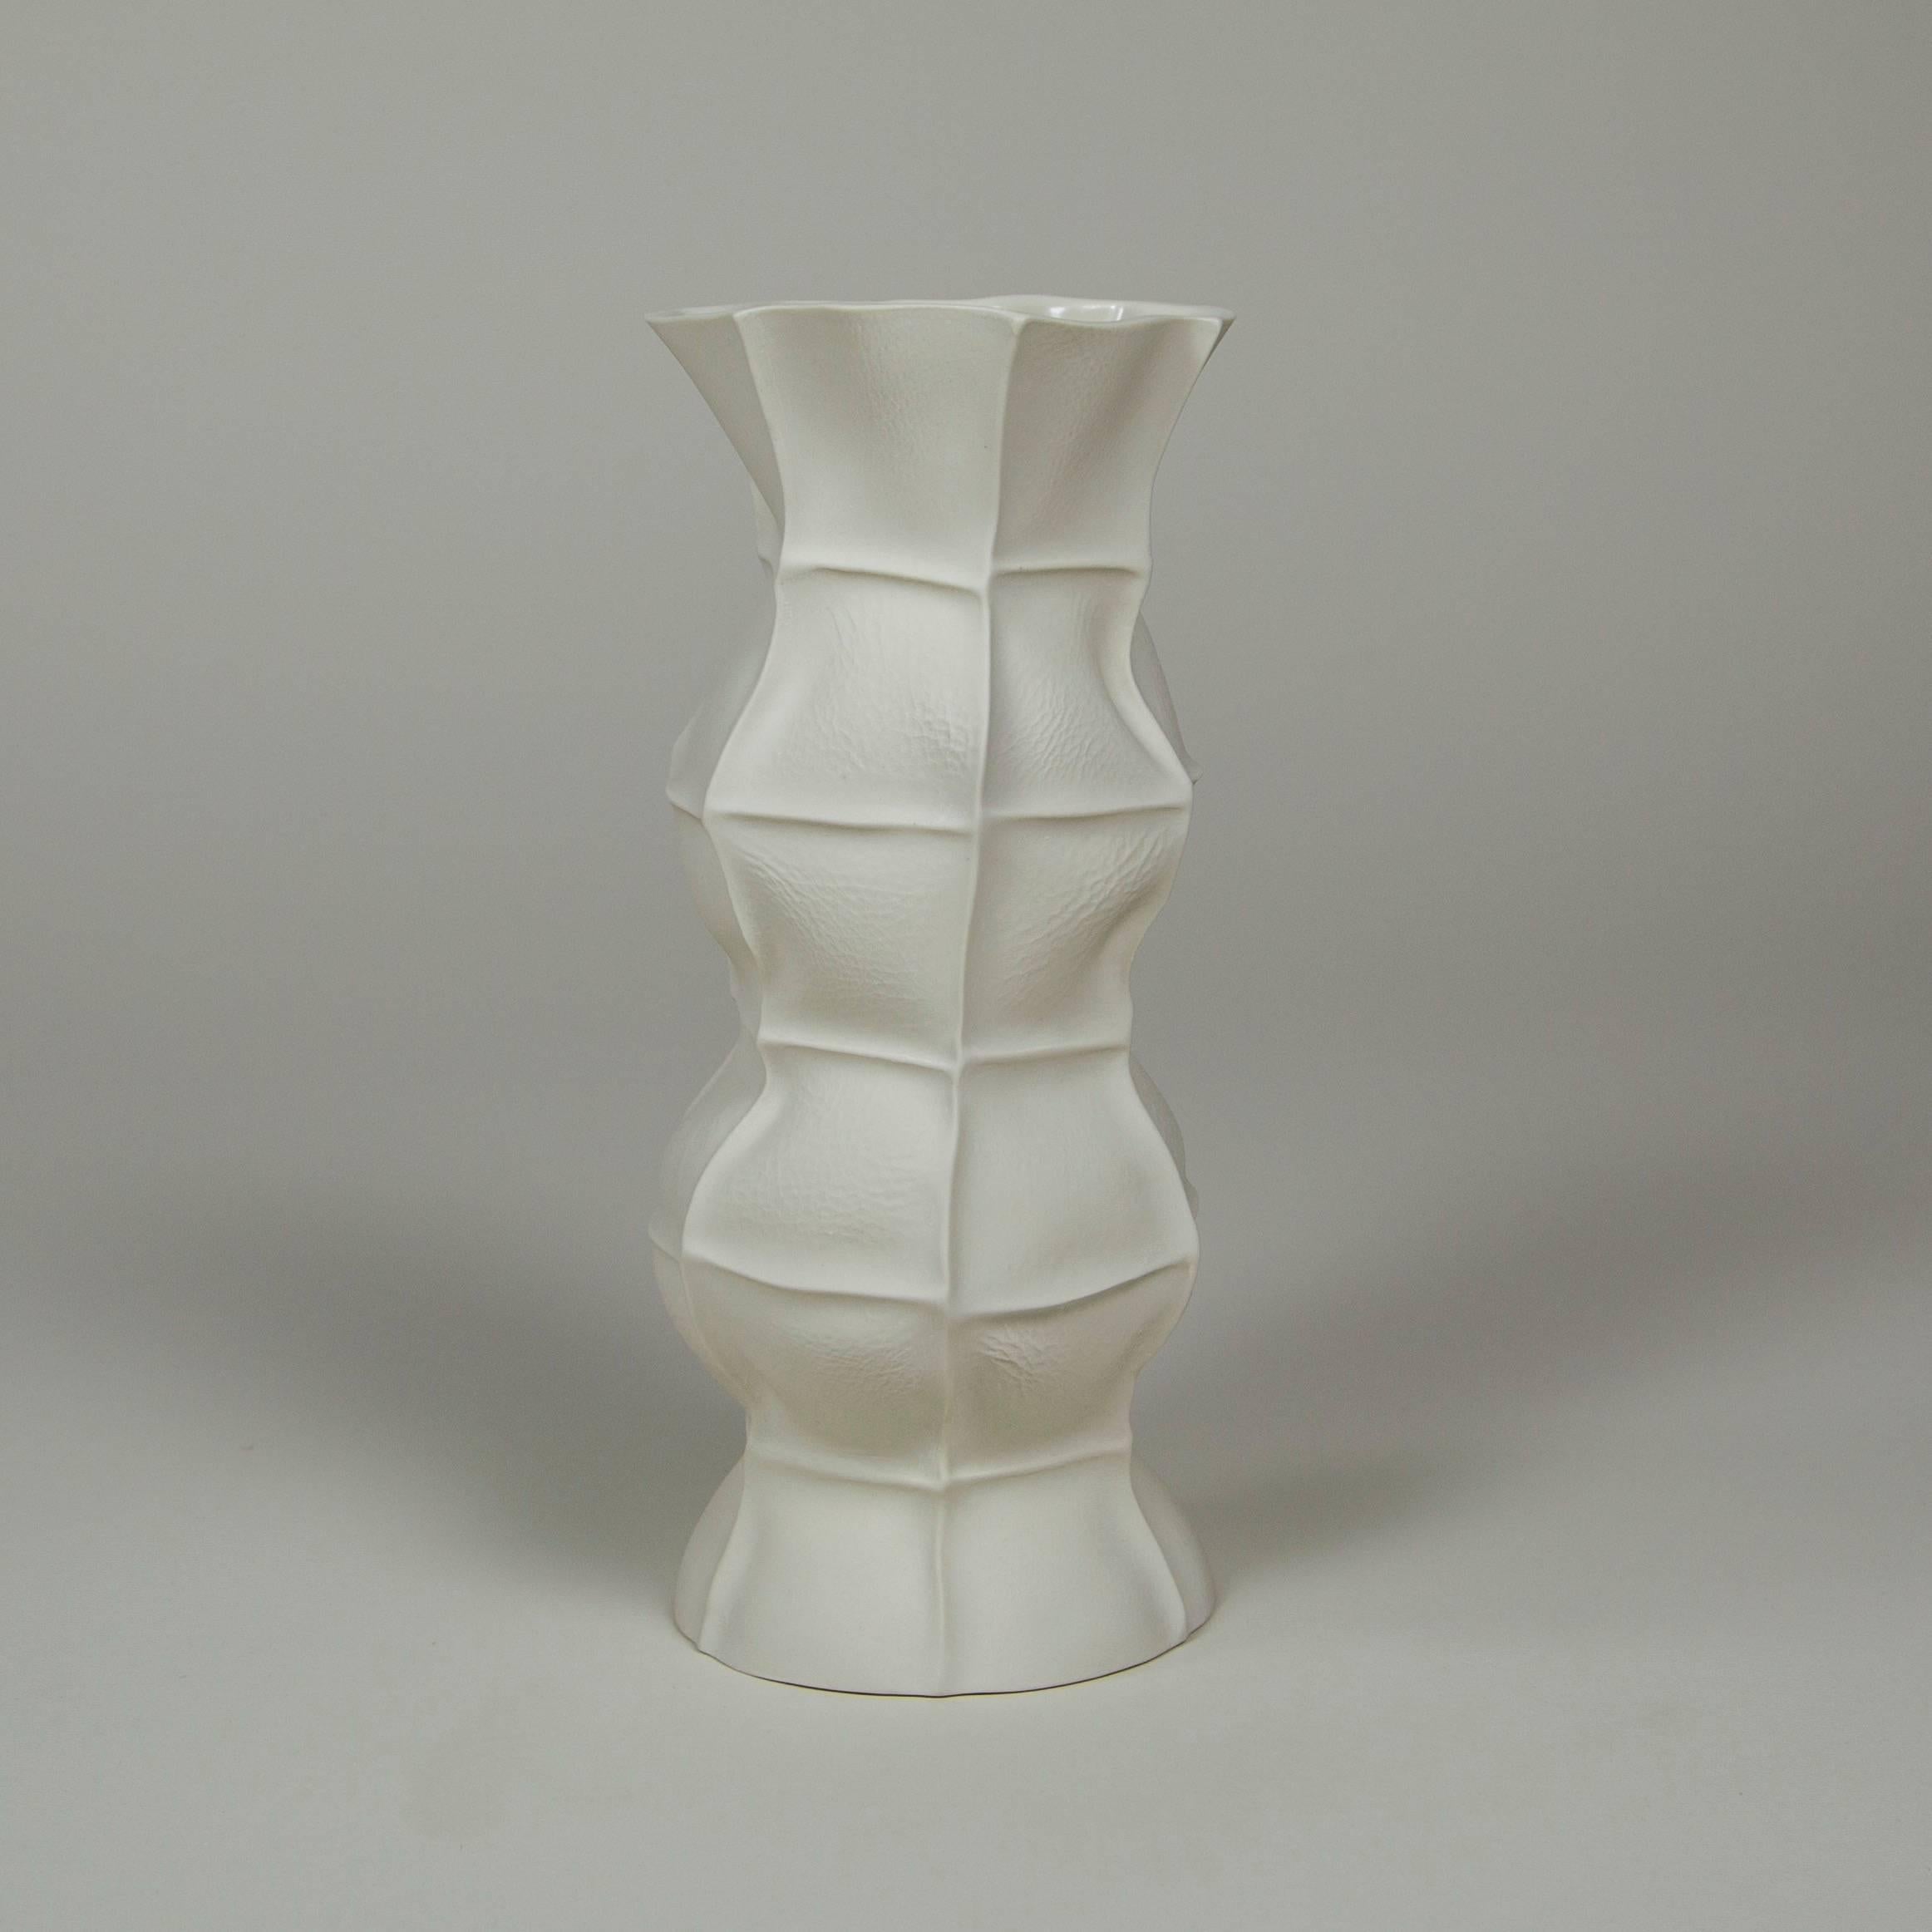 American Set of Five Kawa Vases by Luft Tanaka, in Stock